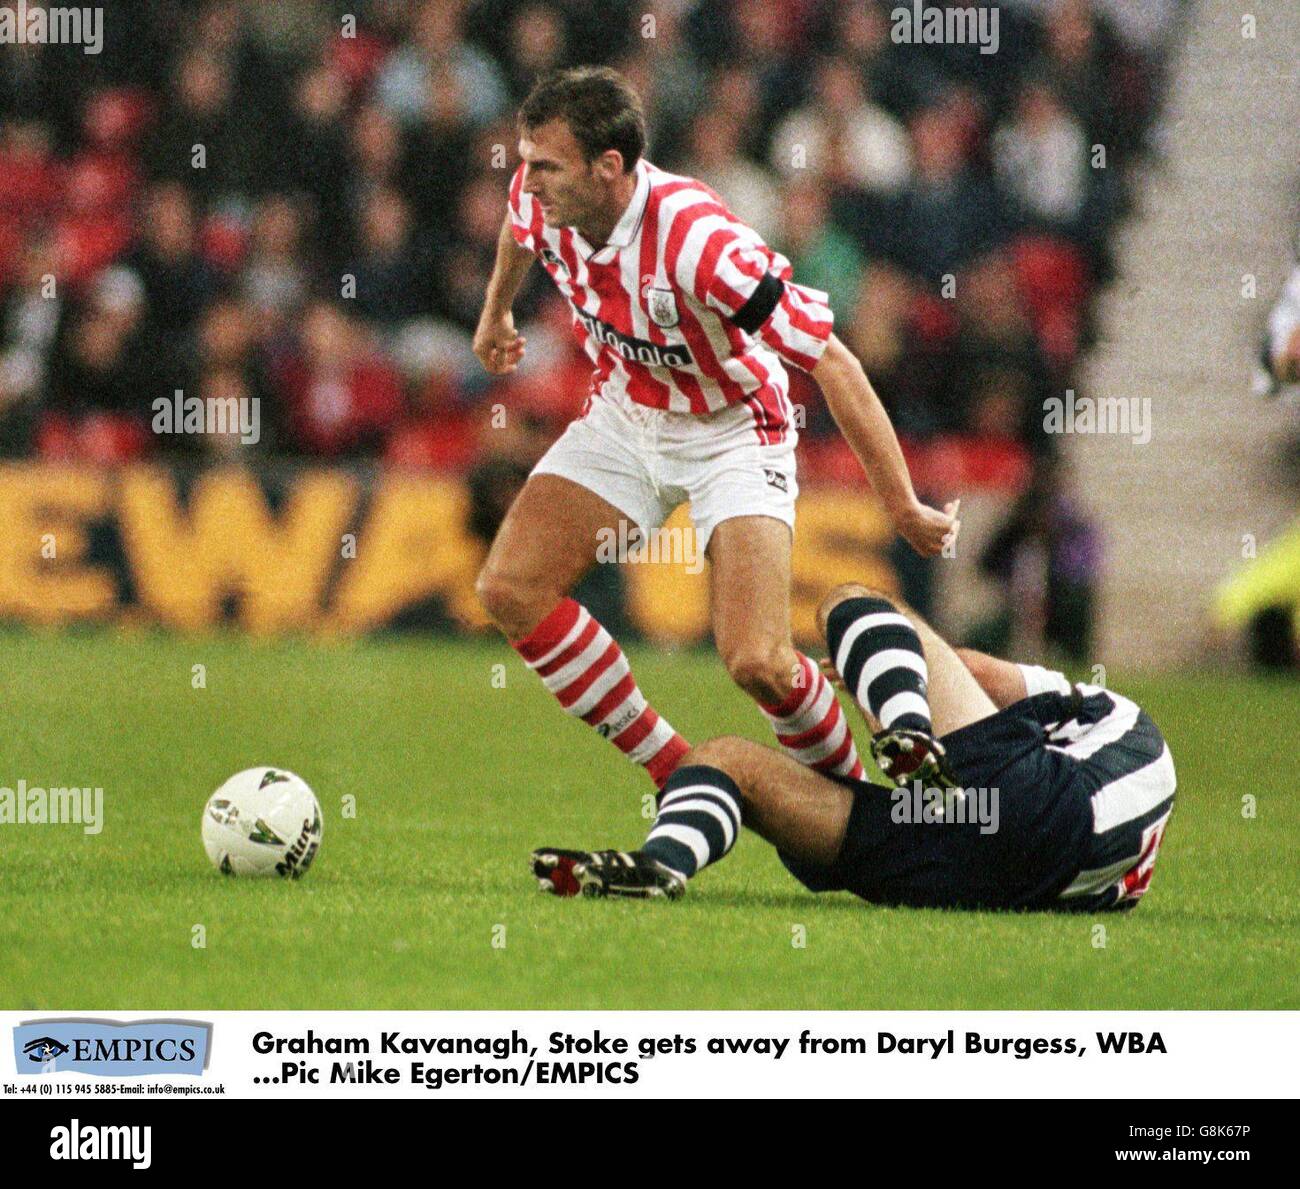 Endsleigh League Soccer ... Stoke City v West Bromwich Albion Stock Photo